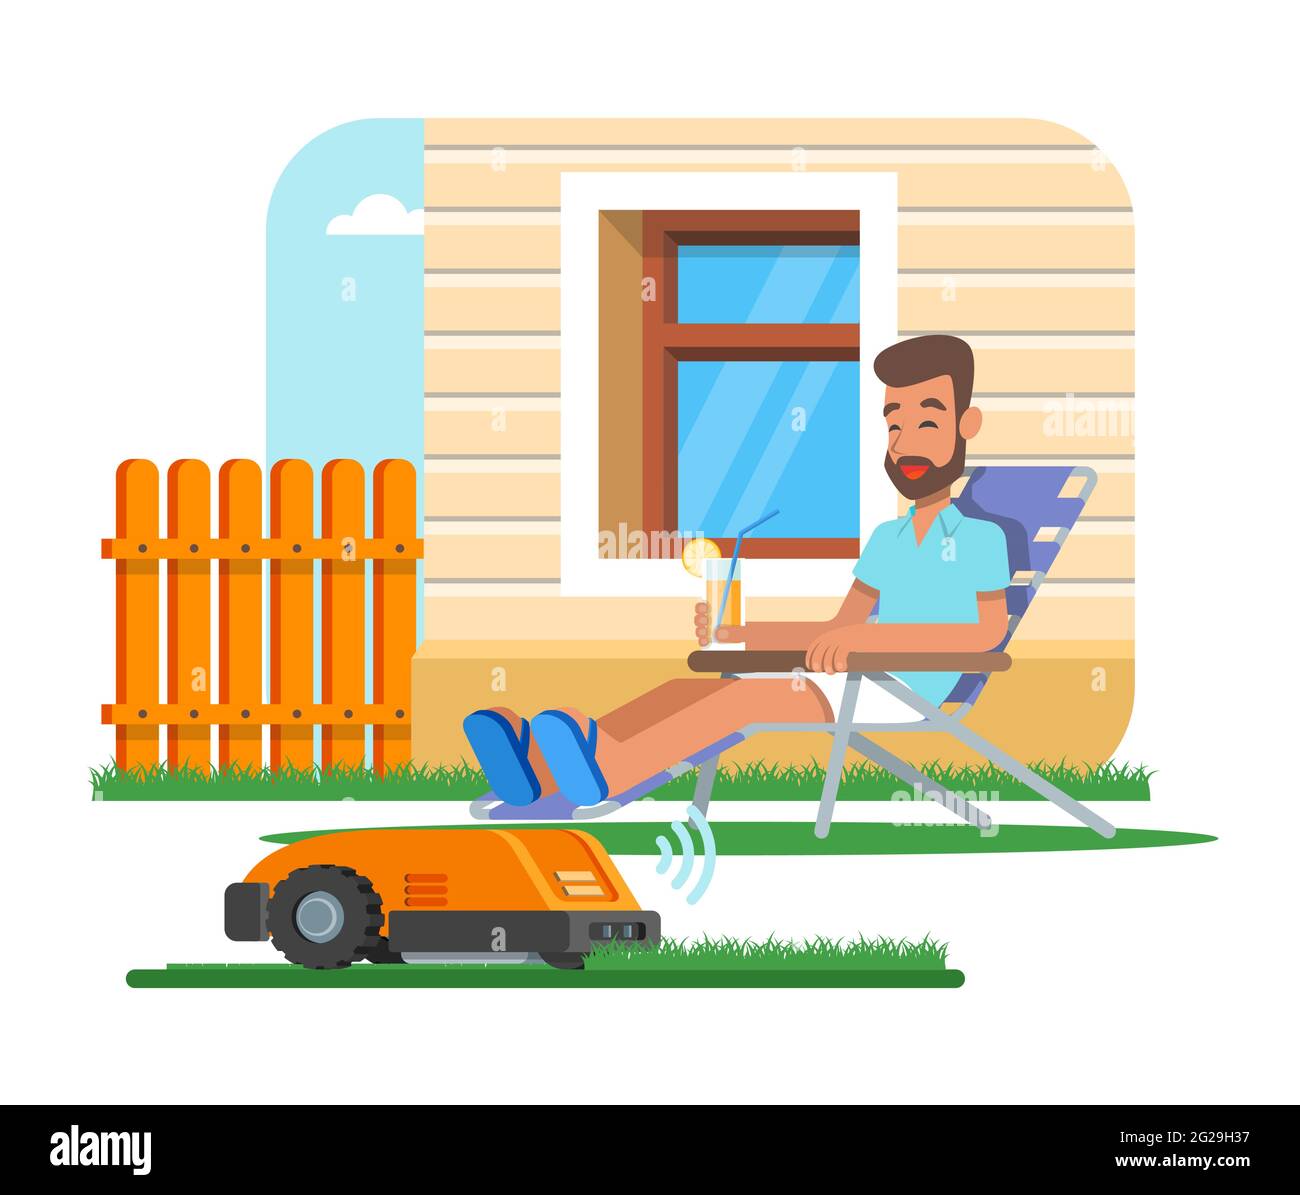 Vector illustration of home robot trimming lawn, man having rest Stock Vector